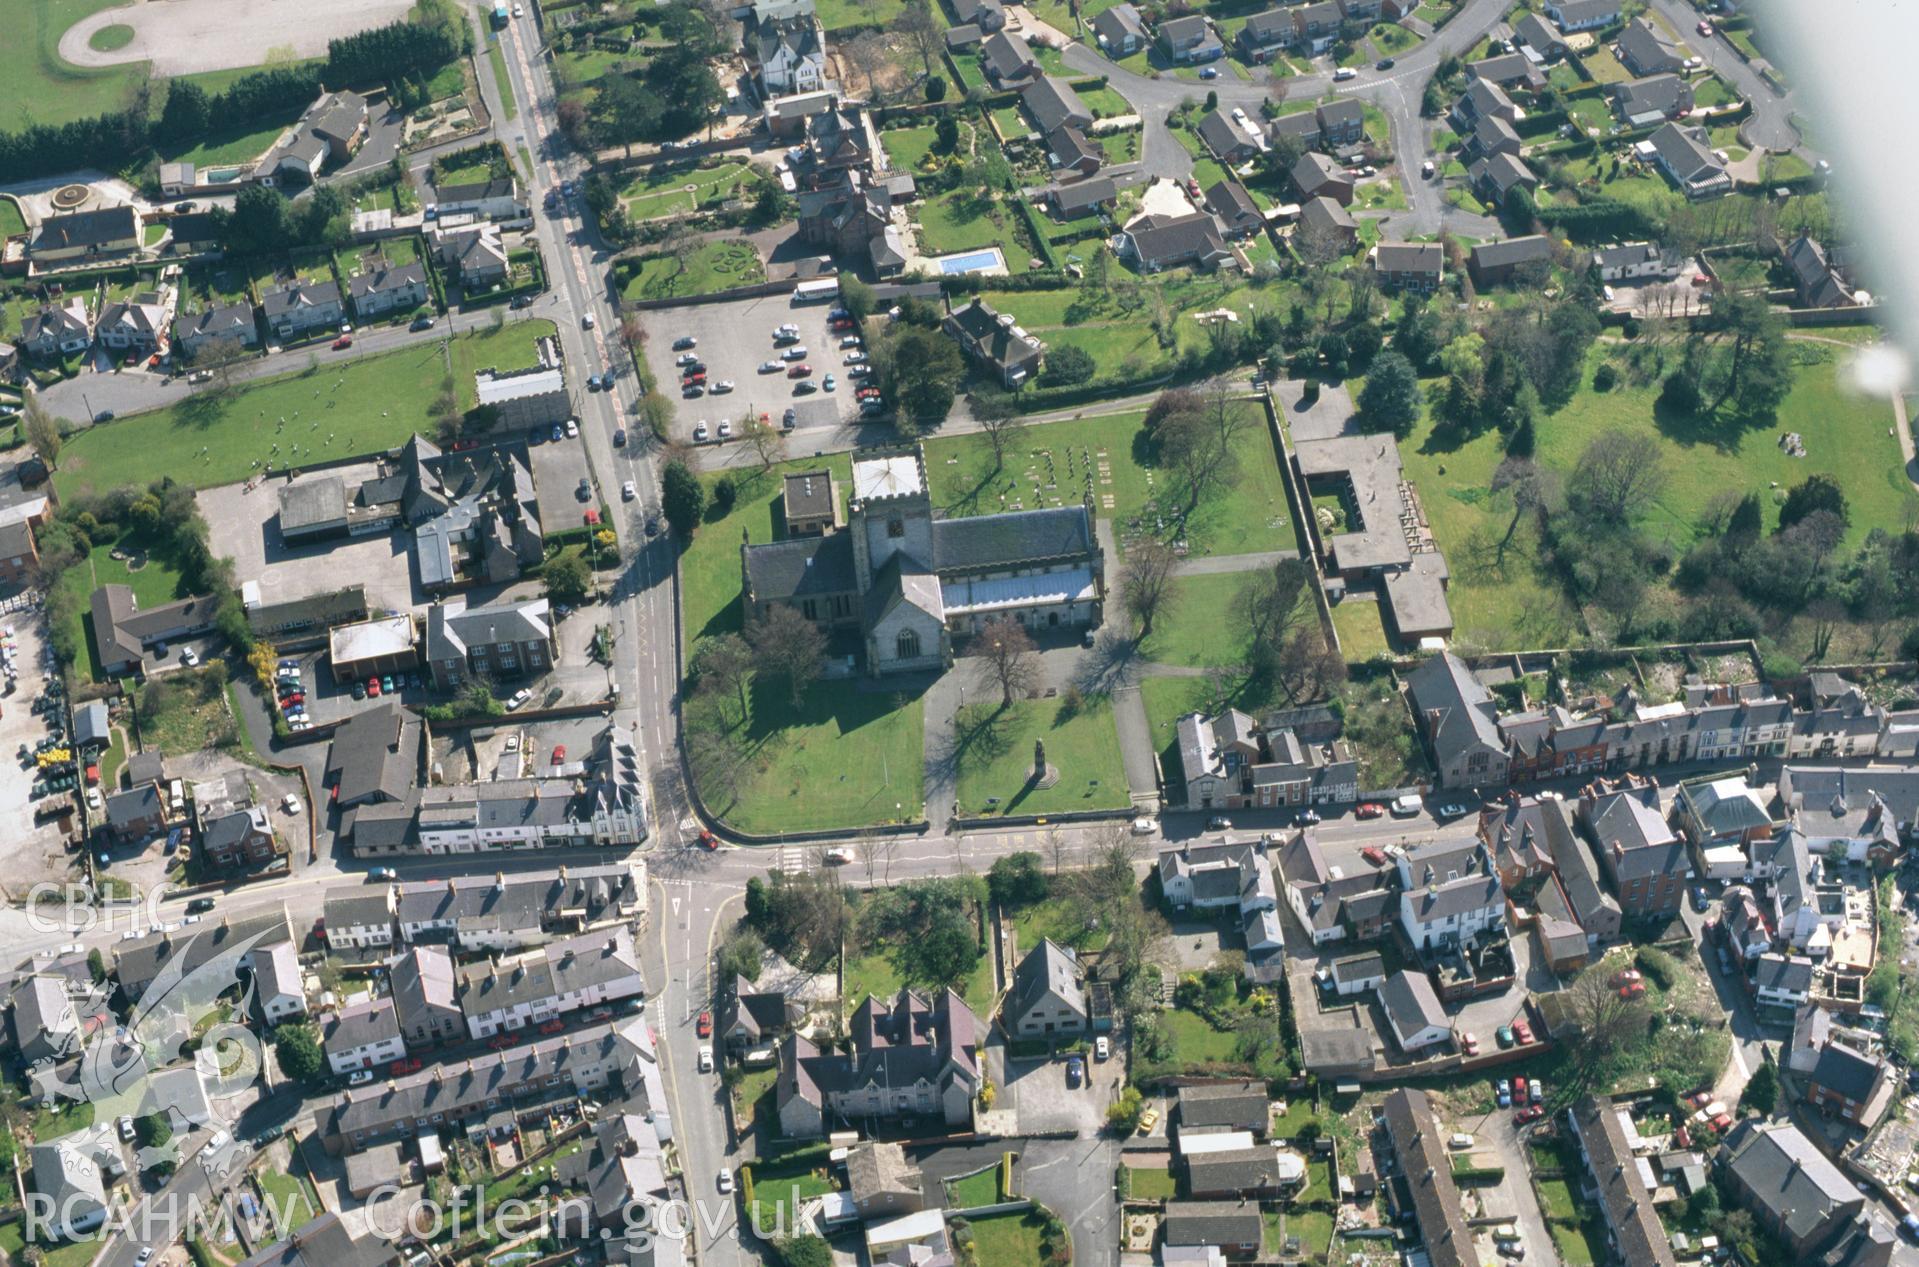 RCAHMW colour oblique aerial photograph of St Asaph Cathedral. Taken by Toby Driver on 08/04/2003